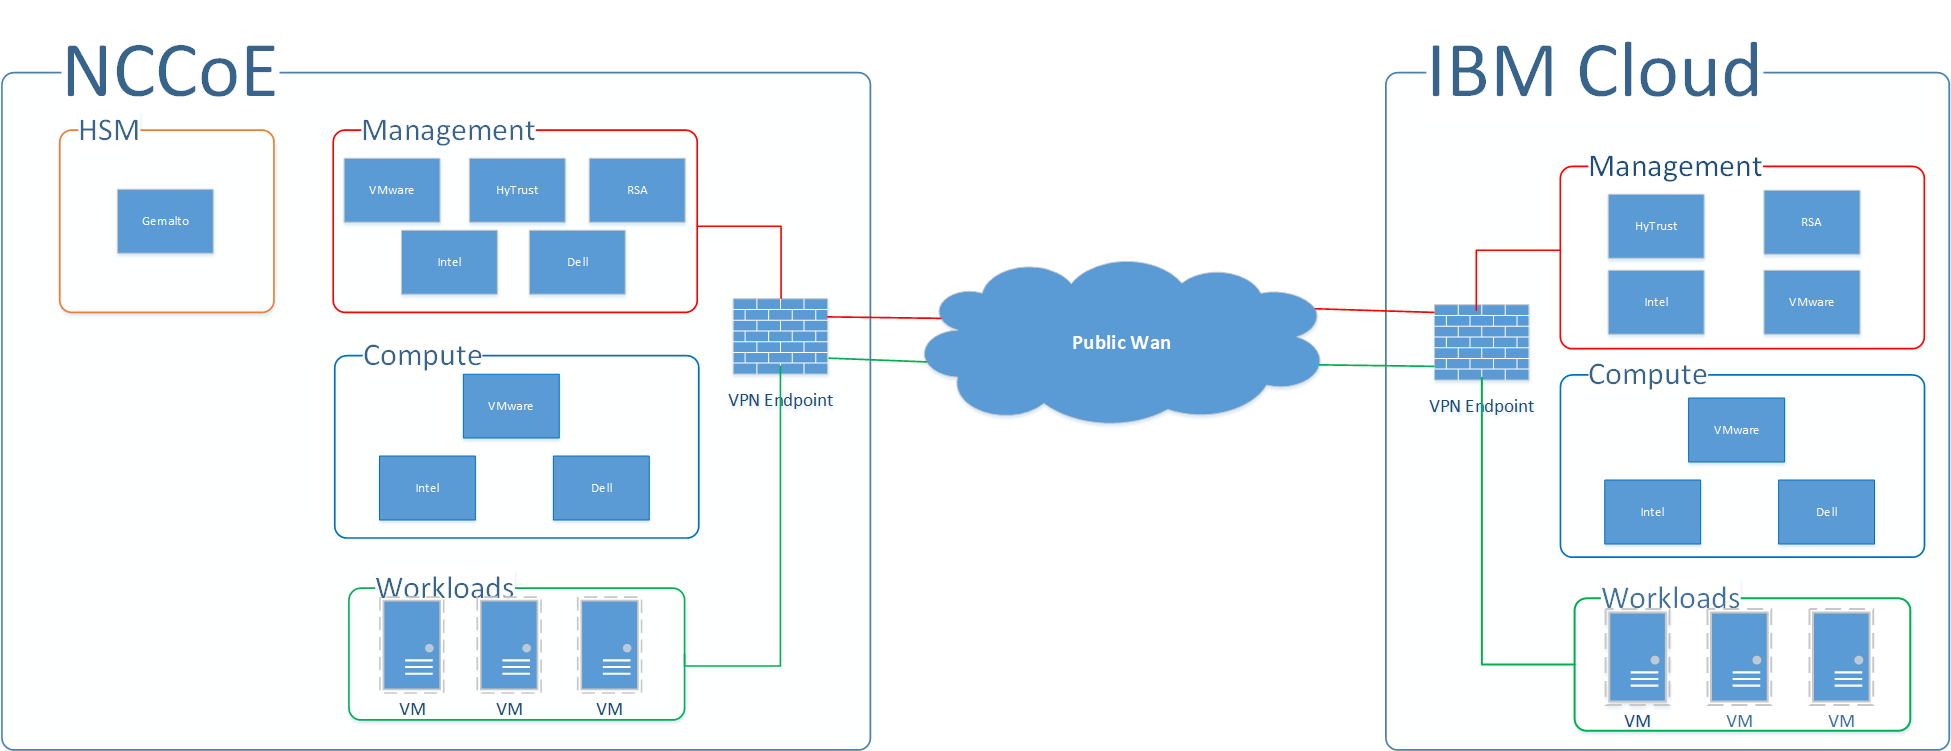 This figure provides a simplified diagram of the trusted cloud architecture. The left side shows the NCCoE network and the right side shows the IBM cloud network, with the networks connected by a public WAN.